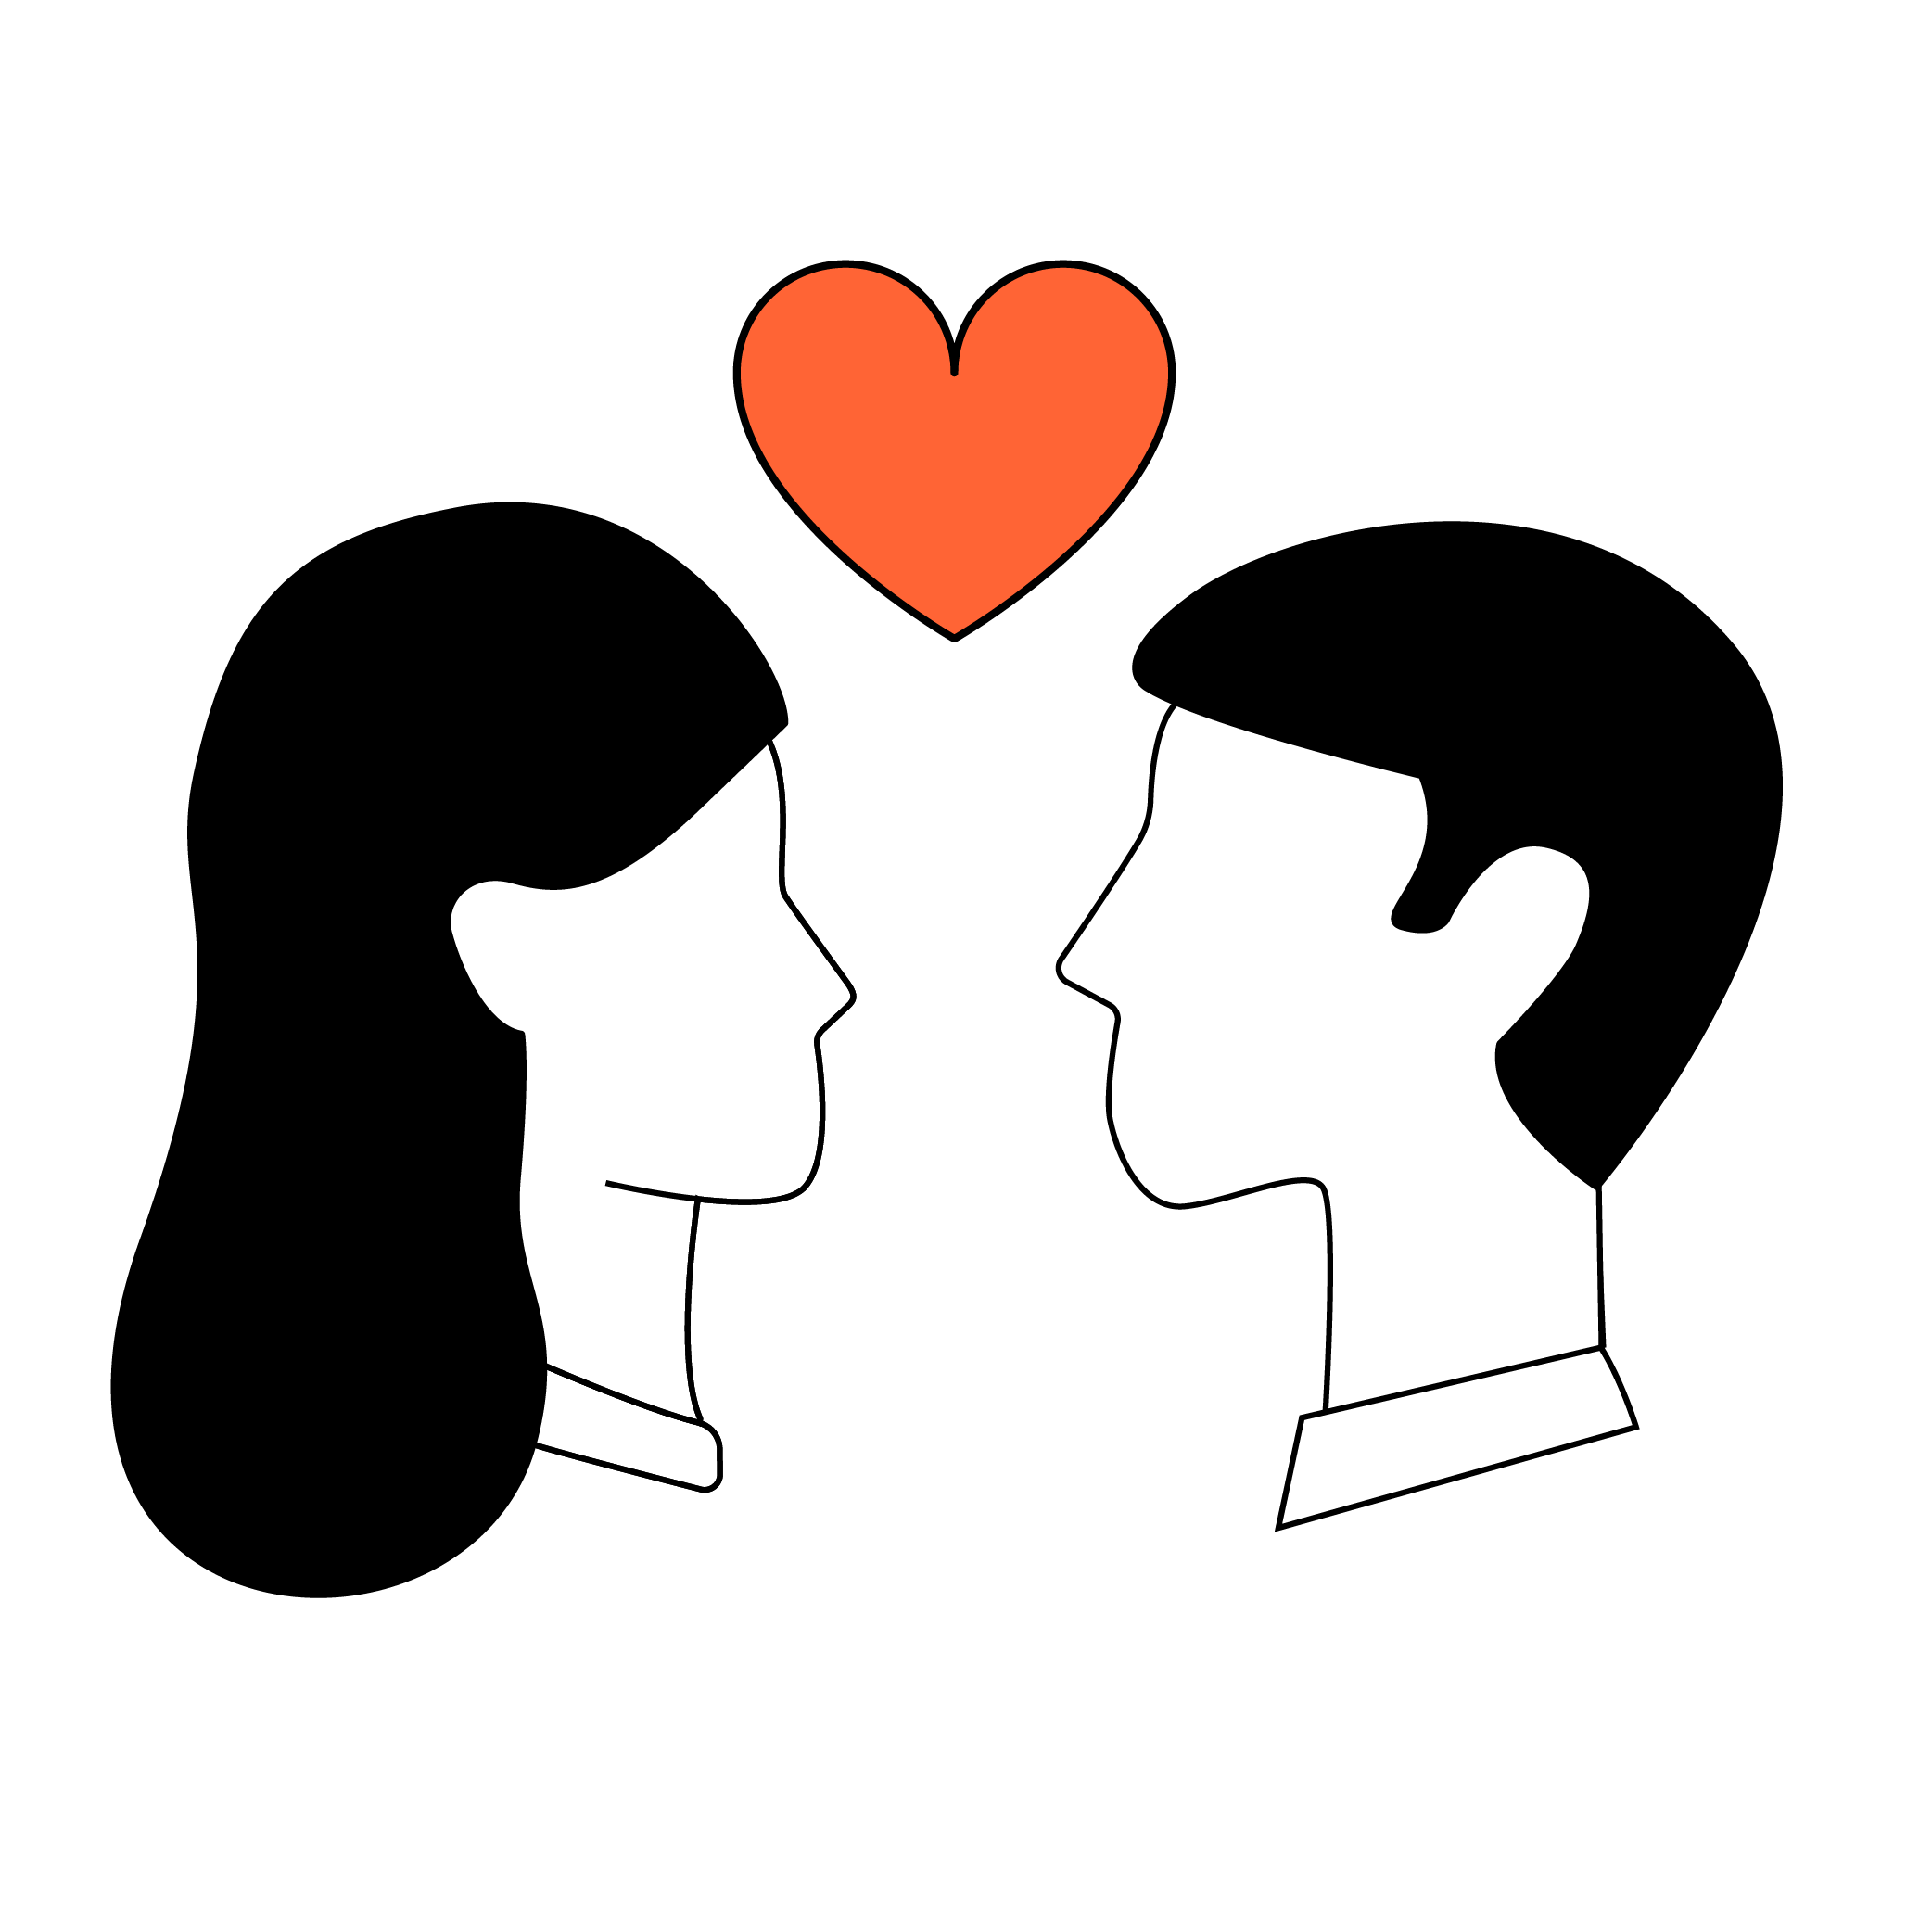 Two drawn people and heart above them